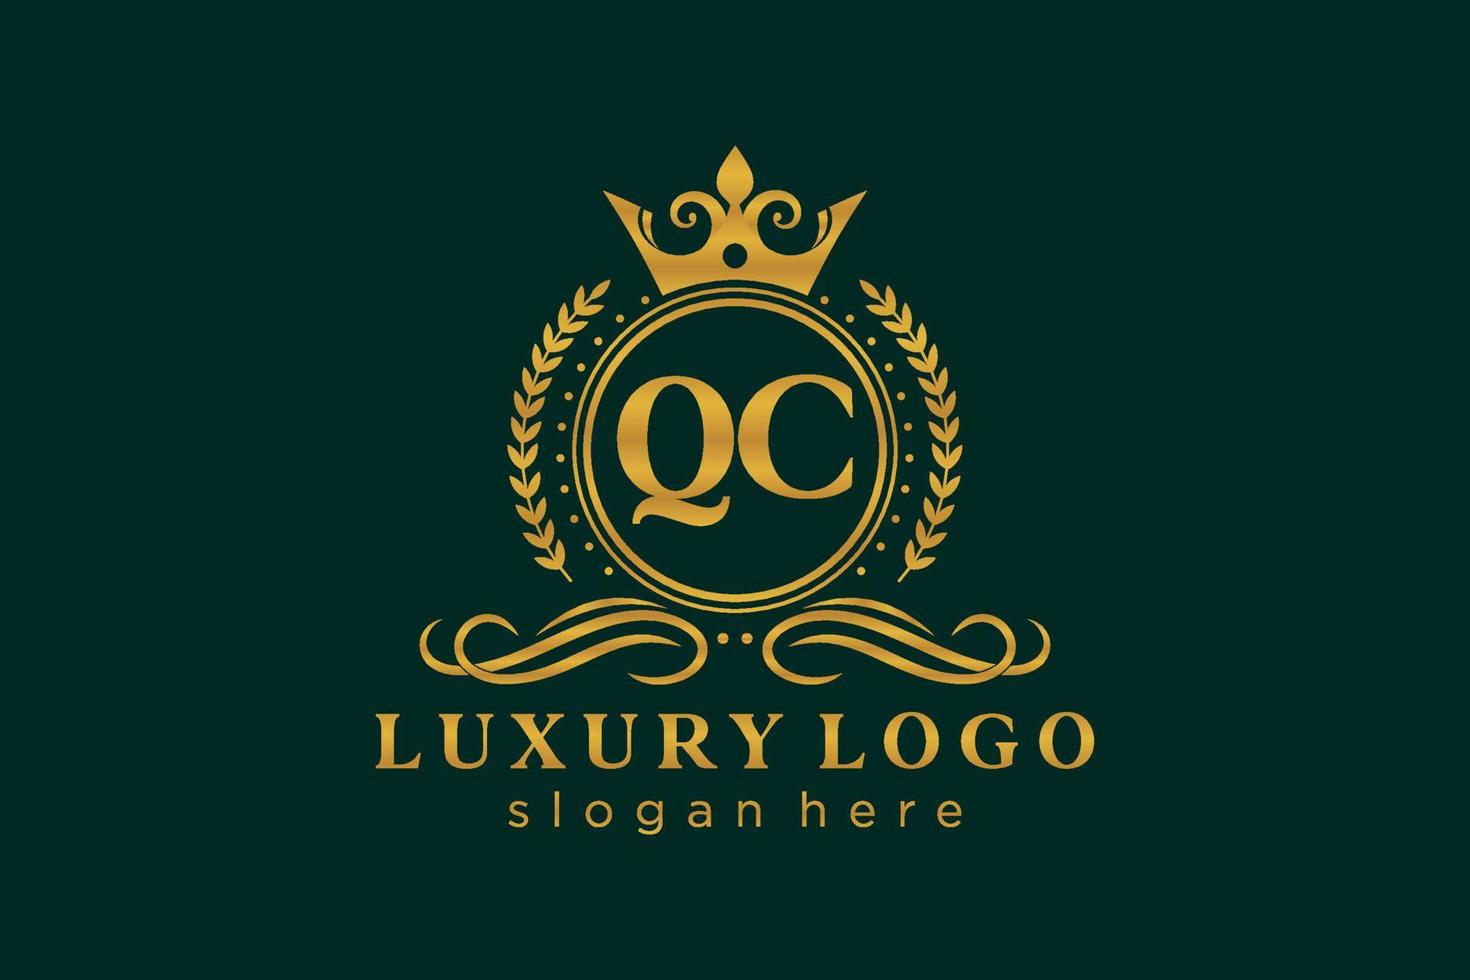 Initial QC Letter Royal Luxury Logo template in vector art for Restaurant, Royalty, Boutique, Cafe, Hotel, Heraldic, Jewelry, Fashion and other vector illustration.